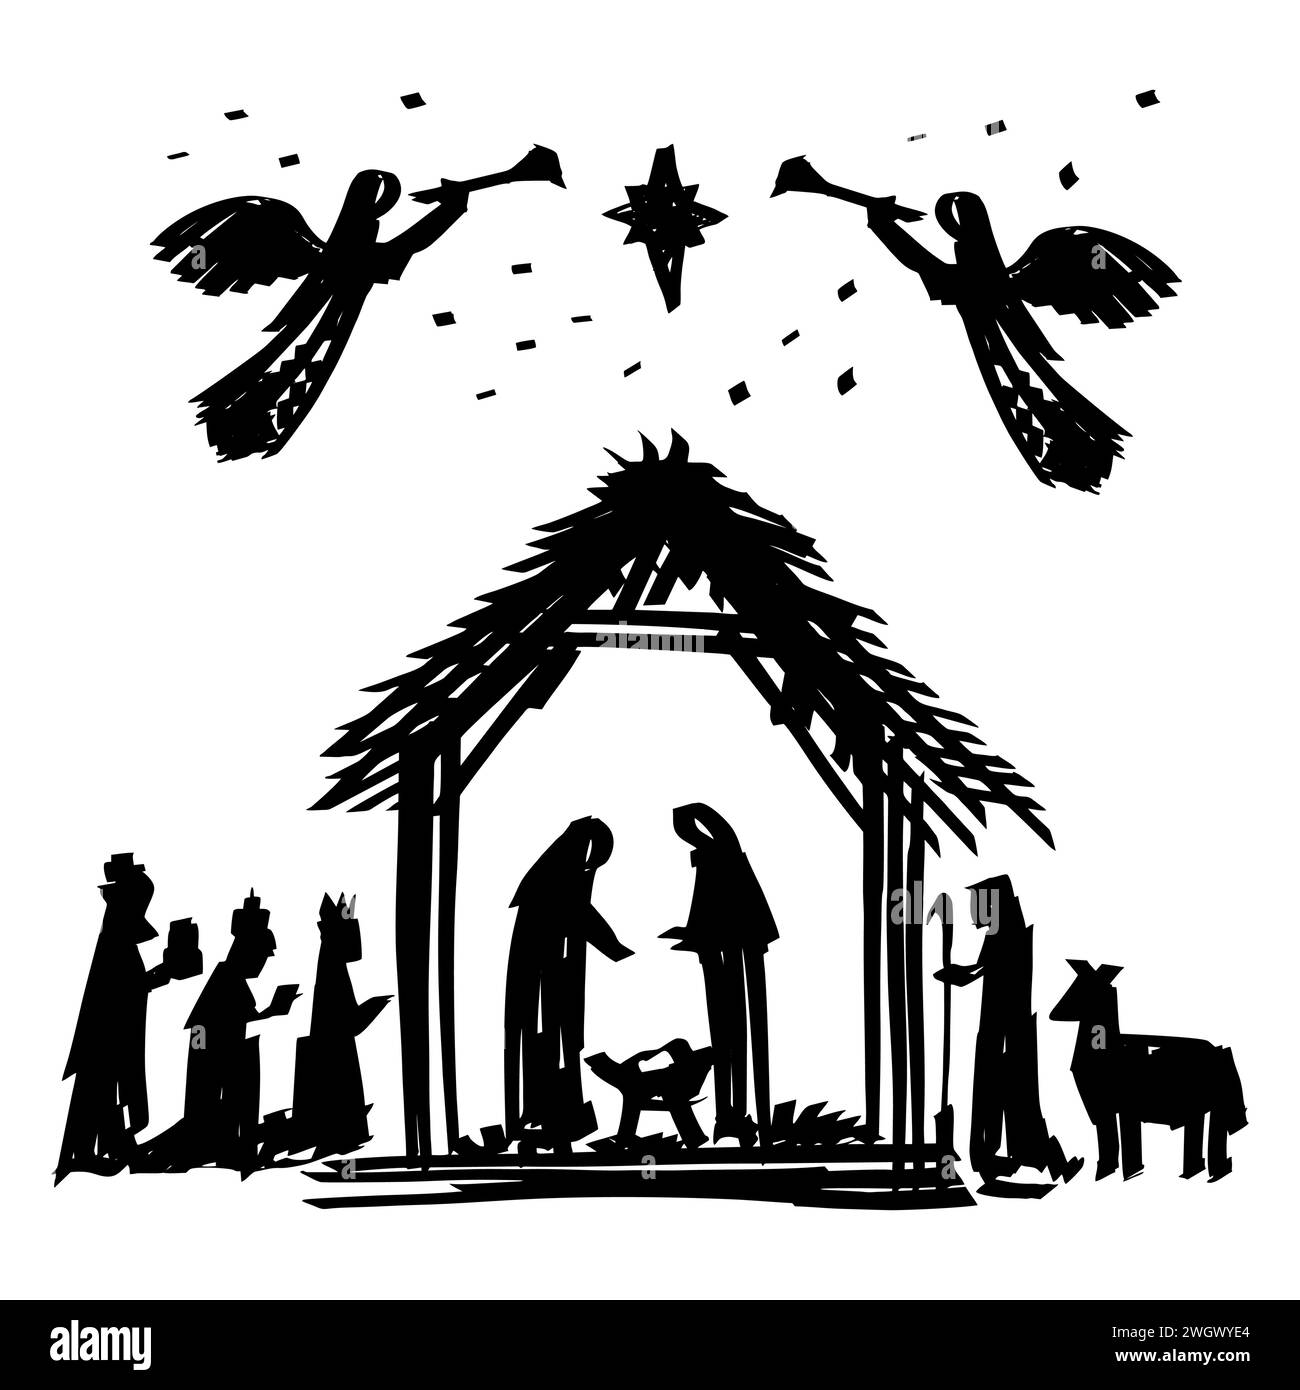 Hand drawn nativity scene. Wise men and shepherds come to worship the born Savior of the world. Stock Vector